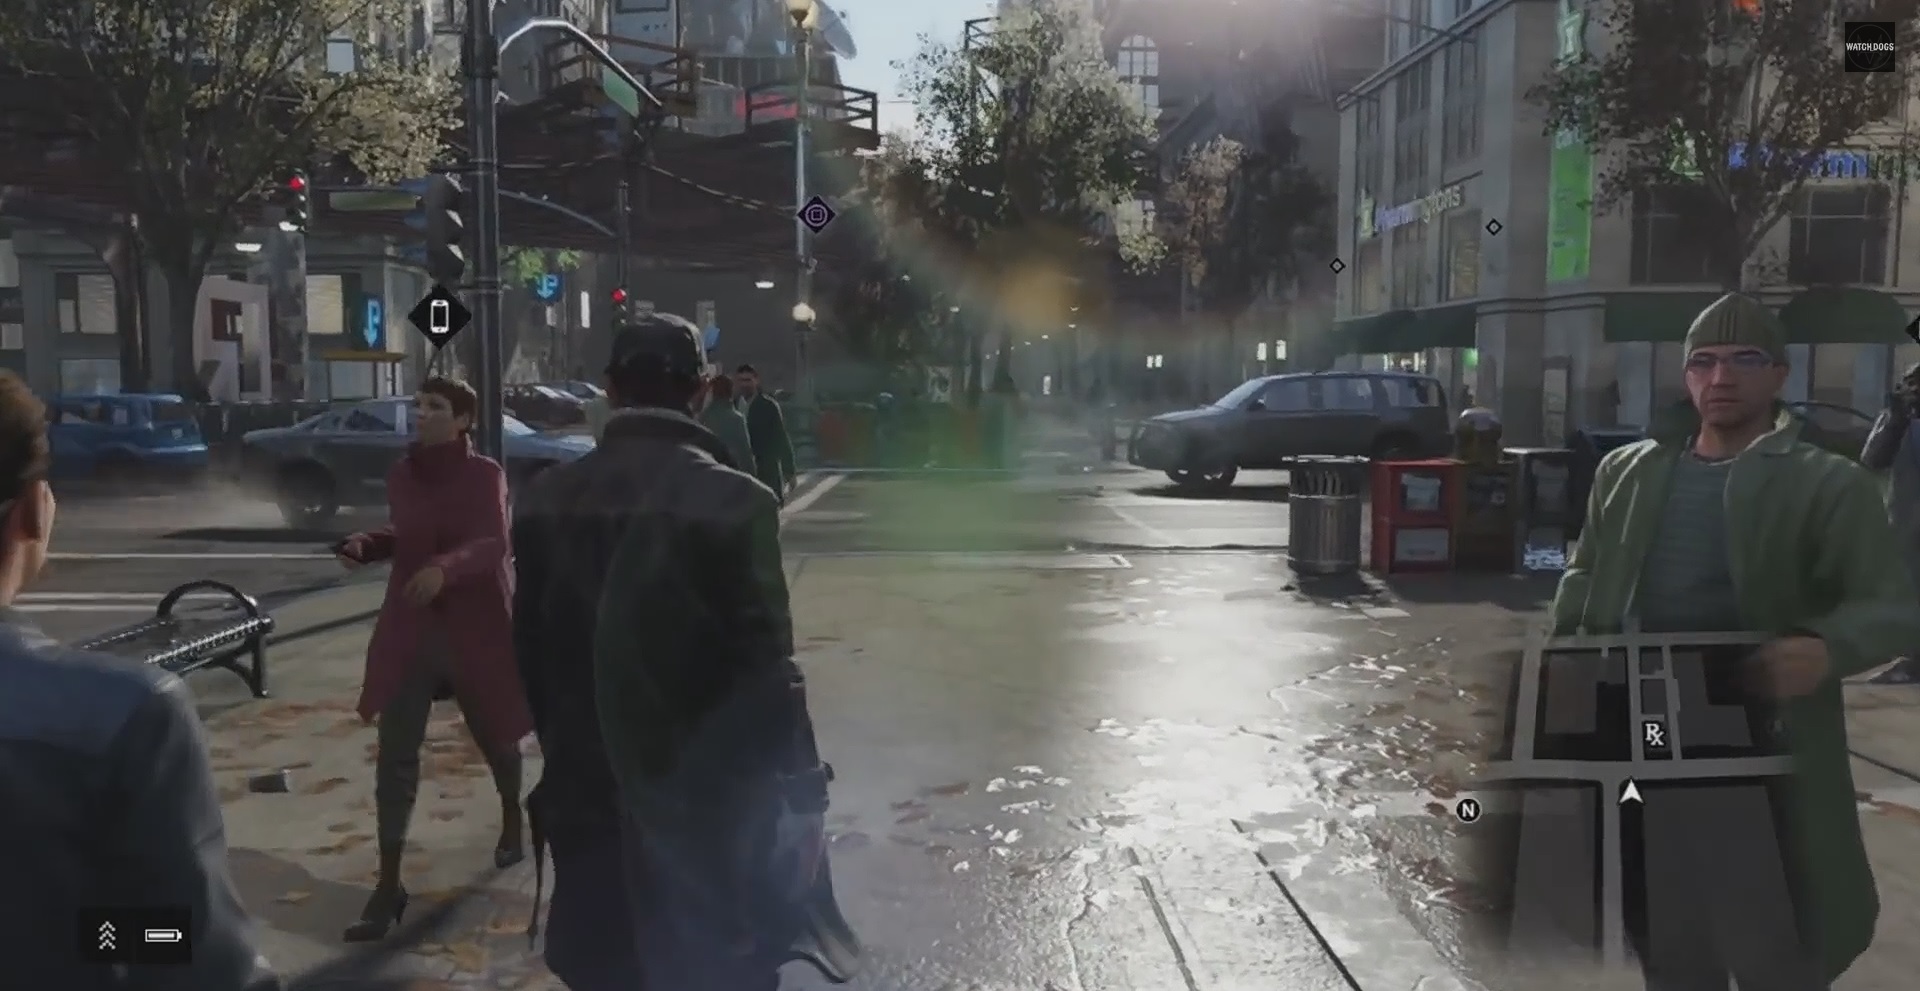 watch dogs pc game trailer